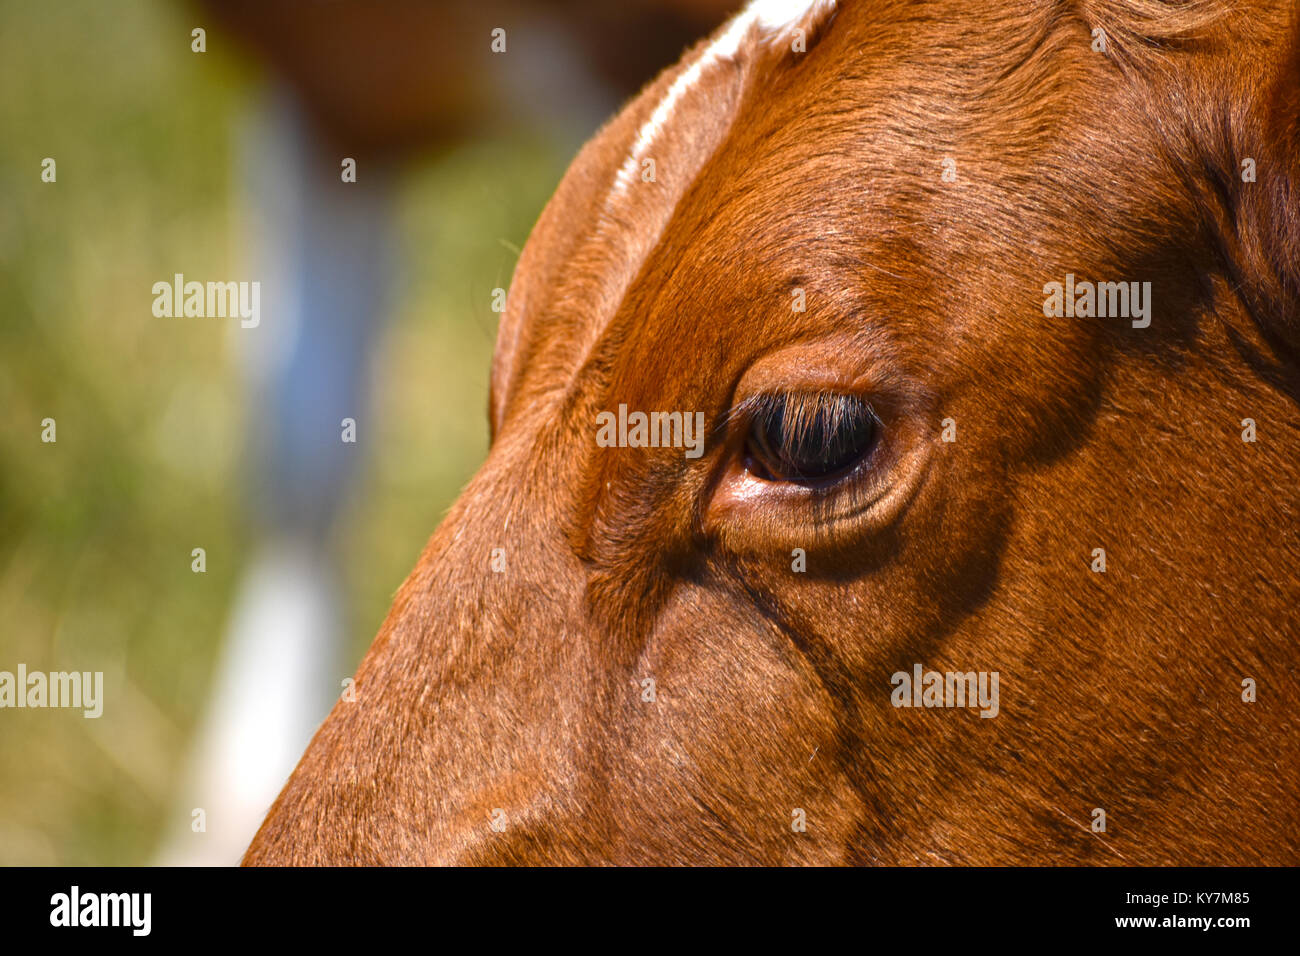 A cow's eye close up - the cow has watery eyes and the fluid has run down the side of its face. Stock Photo